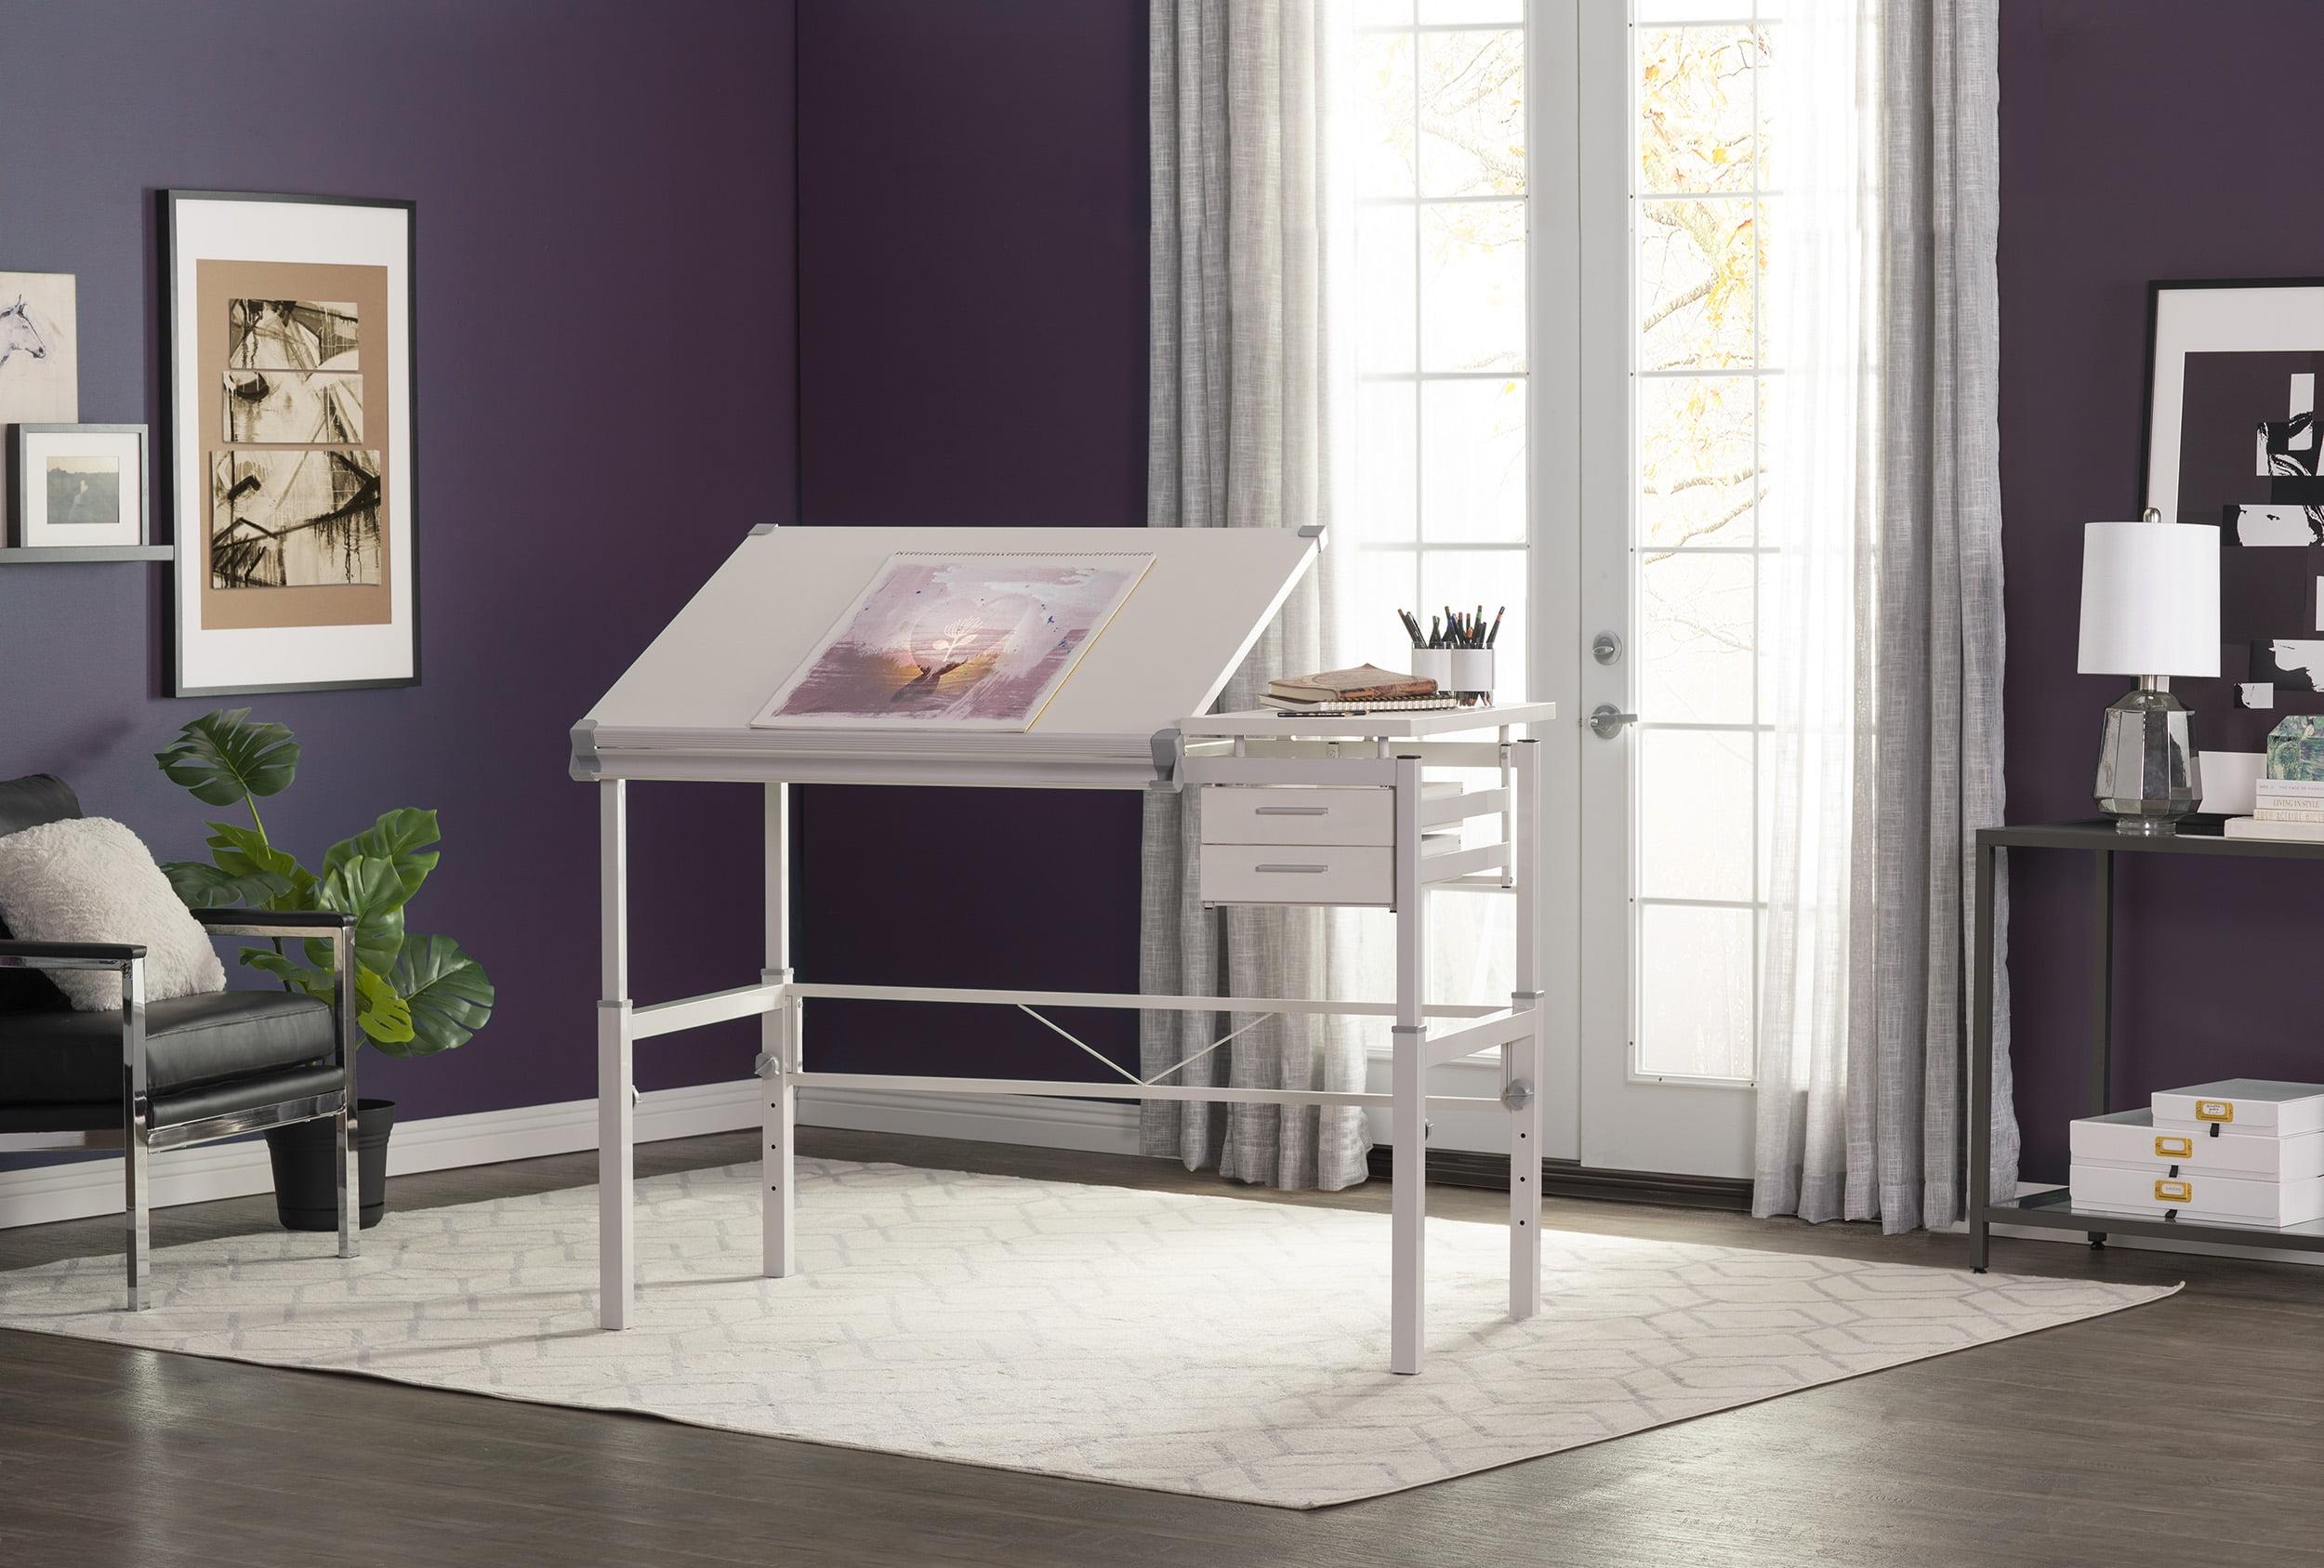 CraftMaster Adjustable Wood Drafting Table with Dual Top and Storage Drawers